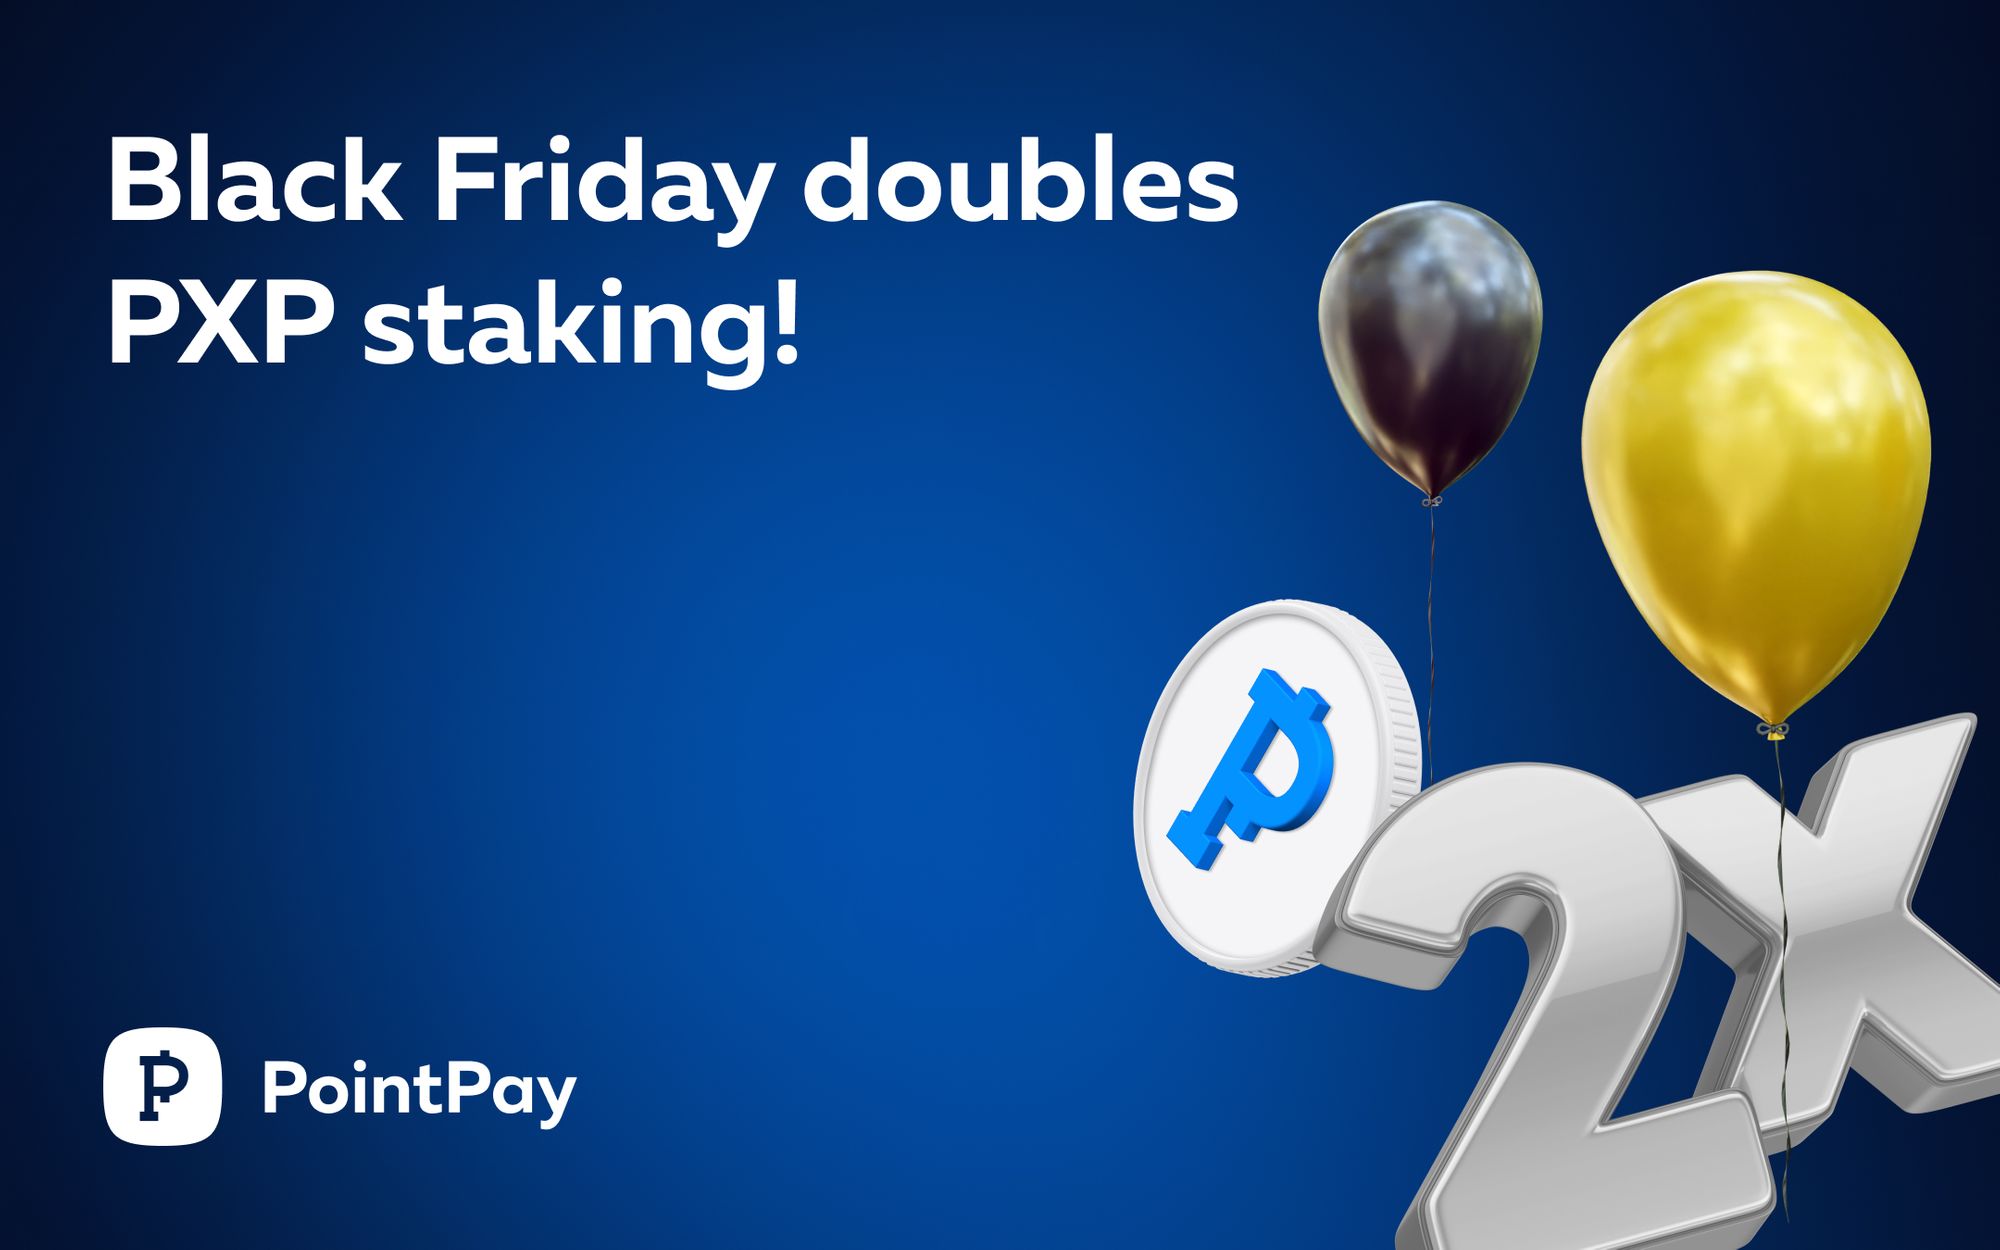 Black Friday brings double the stakes!